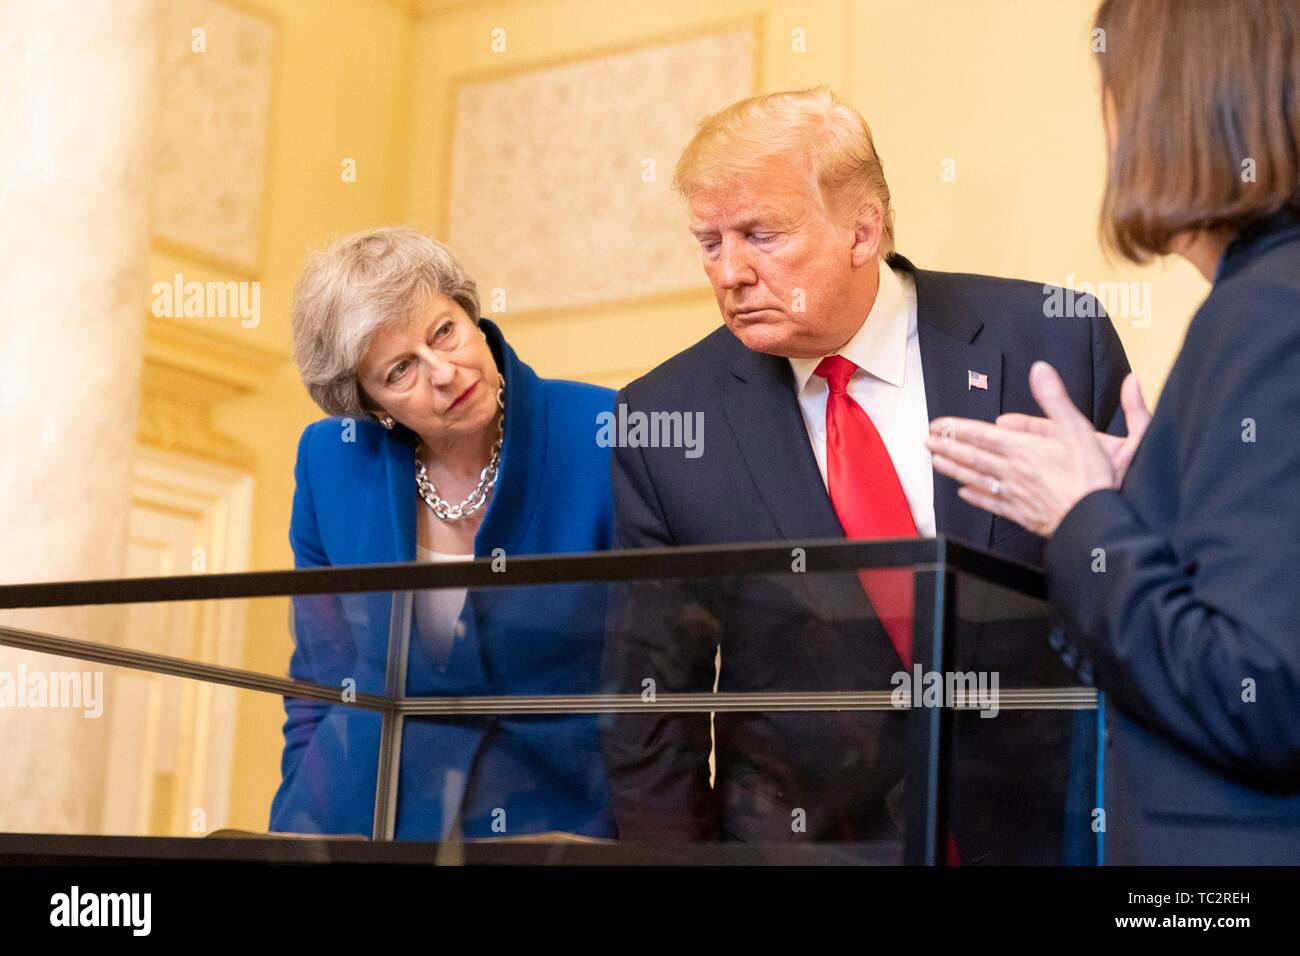 London, UK. 04th June, 2019. U.S President Donald Trump and outgoing British Prime Minister Theresa May view an original copy of the U.S. Declaration of Independence during a tour of historic documents at #10 Downing Street June 4, 2019 in London, England. The handwritten parchment copy of the U.S. Declaration of Independence, known as the Sussex Declaration, is one of only two known to exist. Credit: Planetpix/Alamy Live News Stock Photo